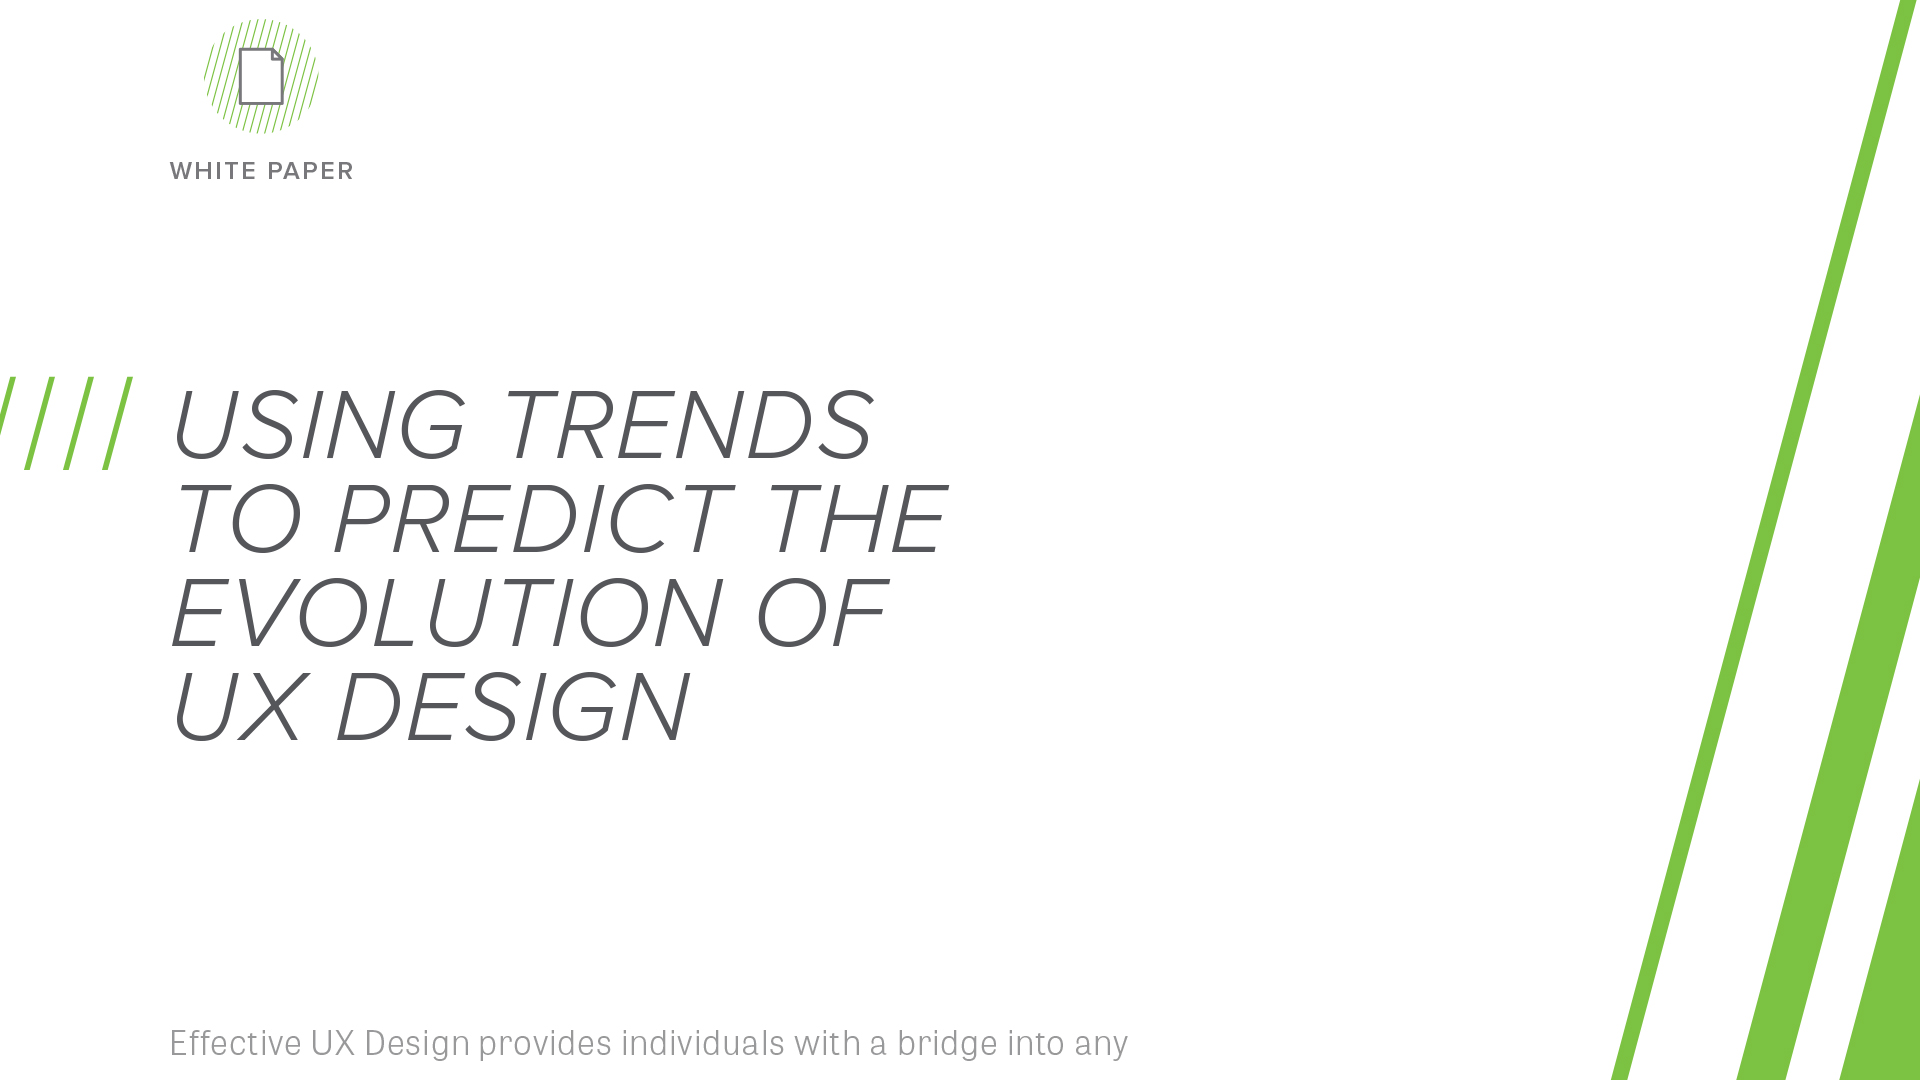 Using Trends to Predict the Evolution of UX Design